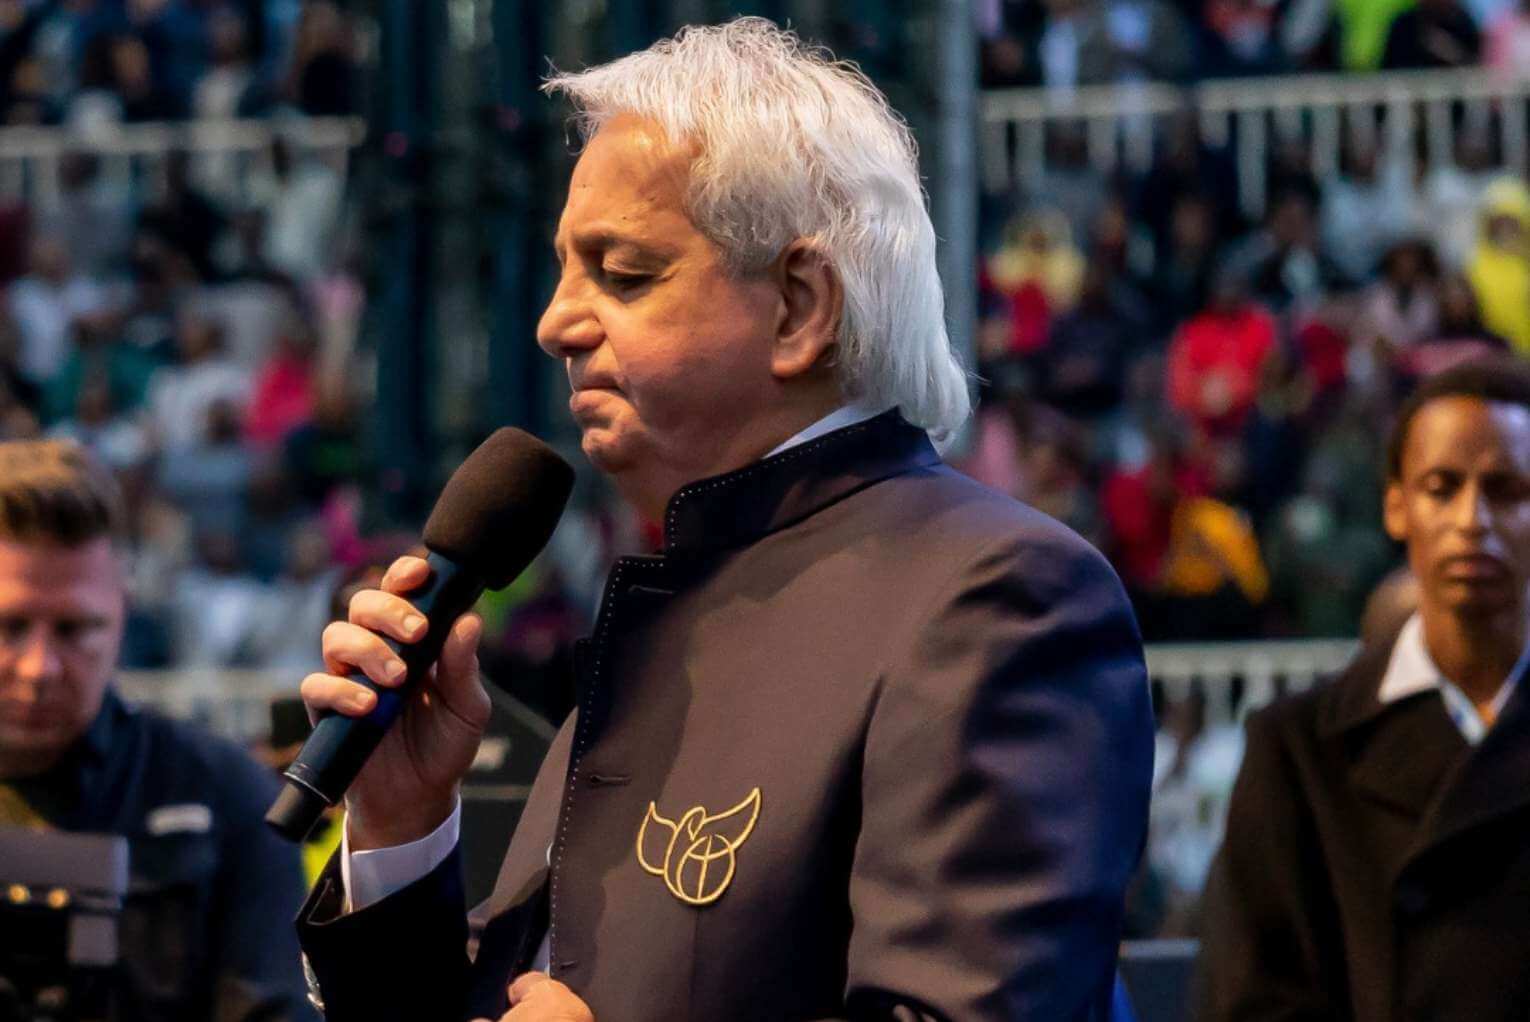 Morning Rundown: Pastor Benny Hinn: Financial Giving Will Protect God’s People in Face of Darkness